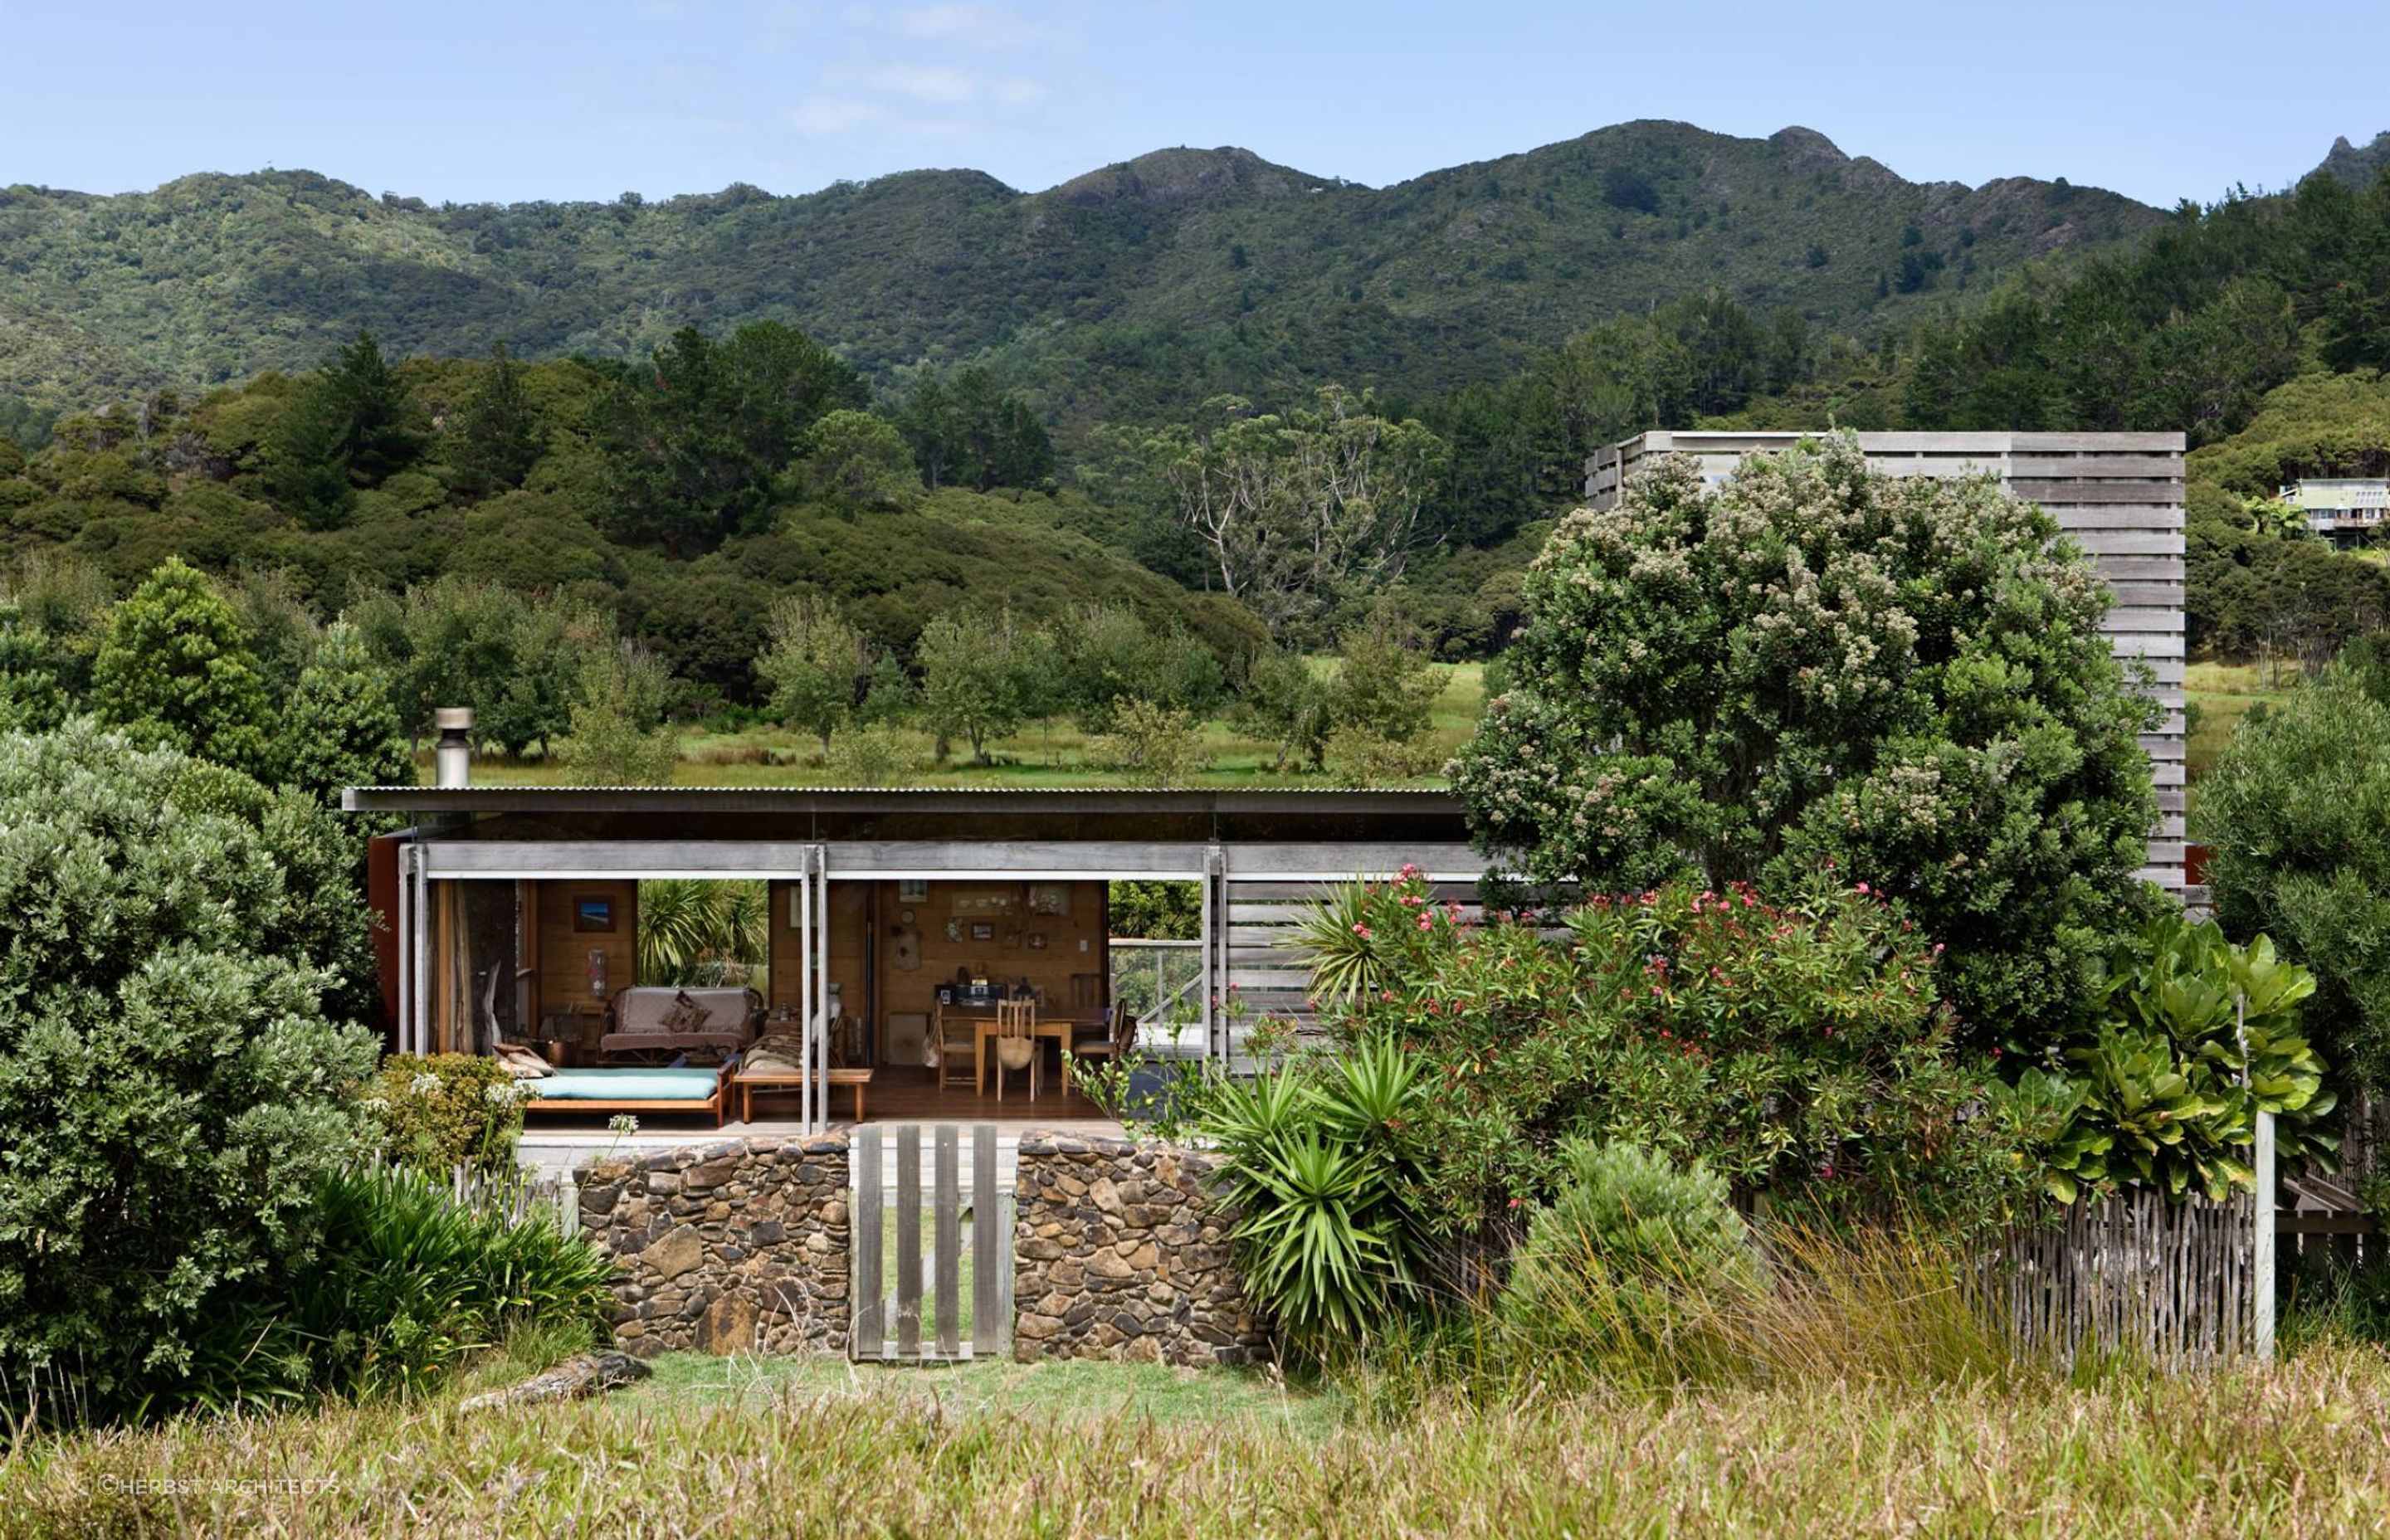 Island Bach, Great Barrier Island, by Herbst Architects.